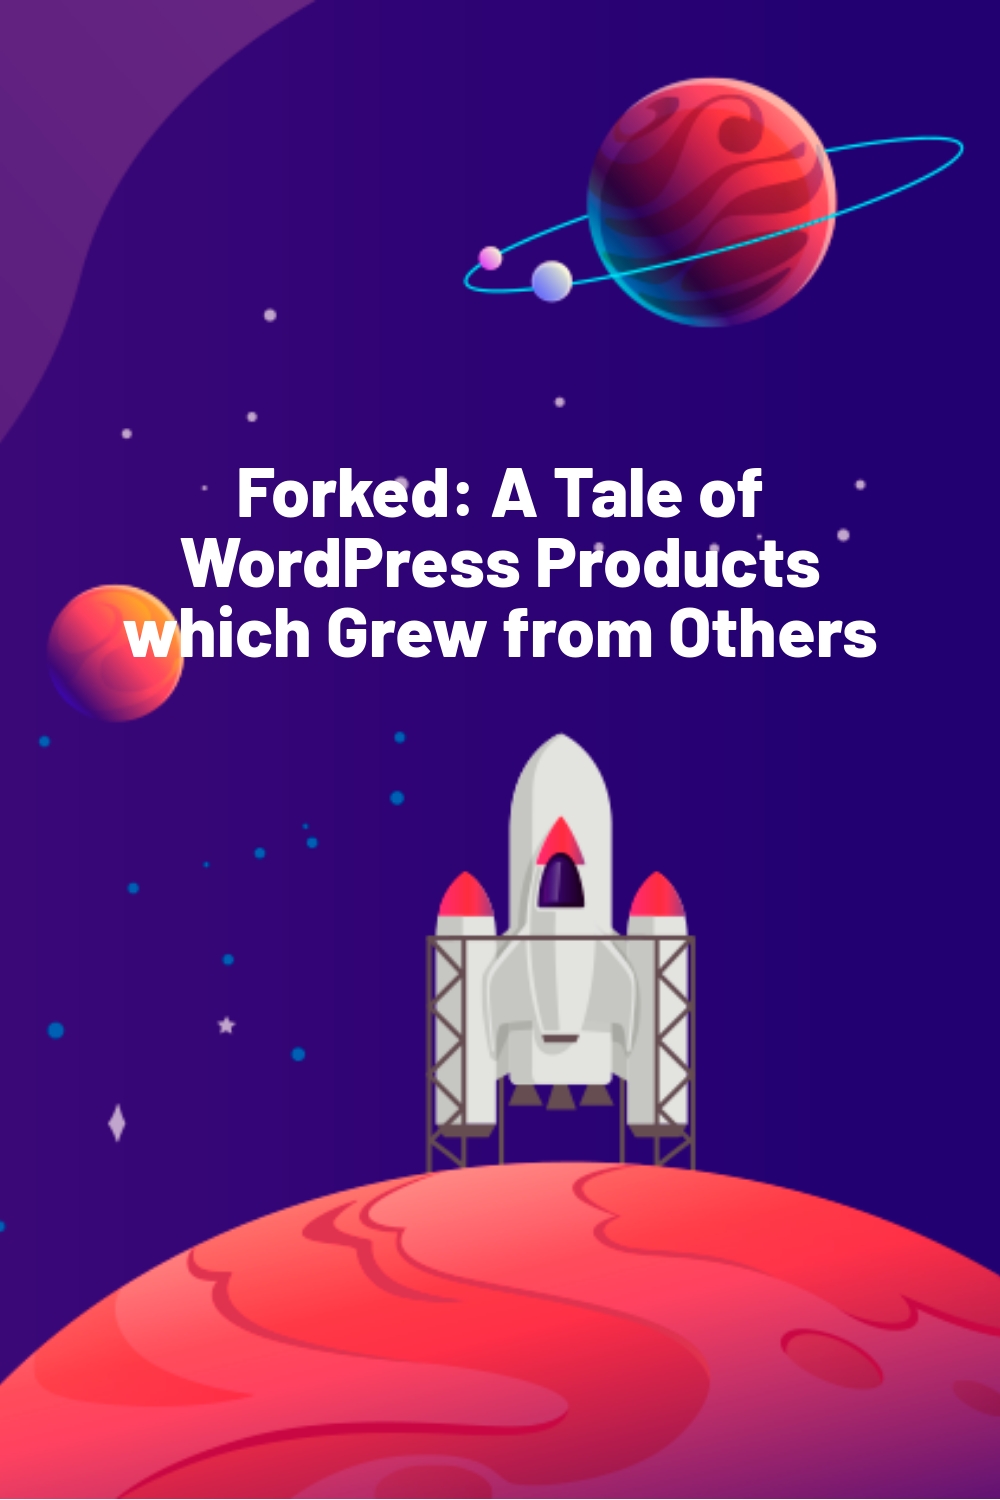 Forked: A Tale of WordPress Products which Grew from Others